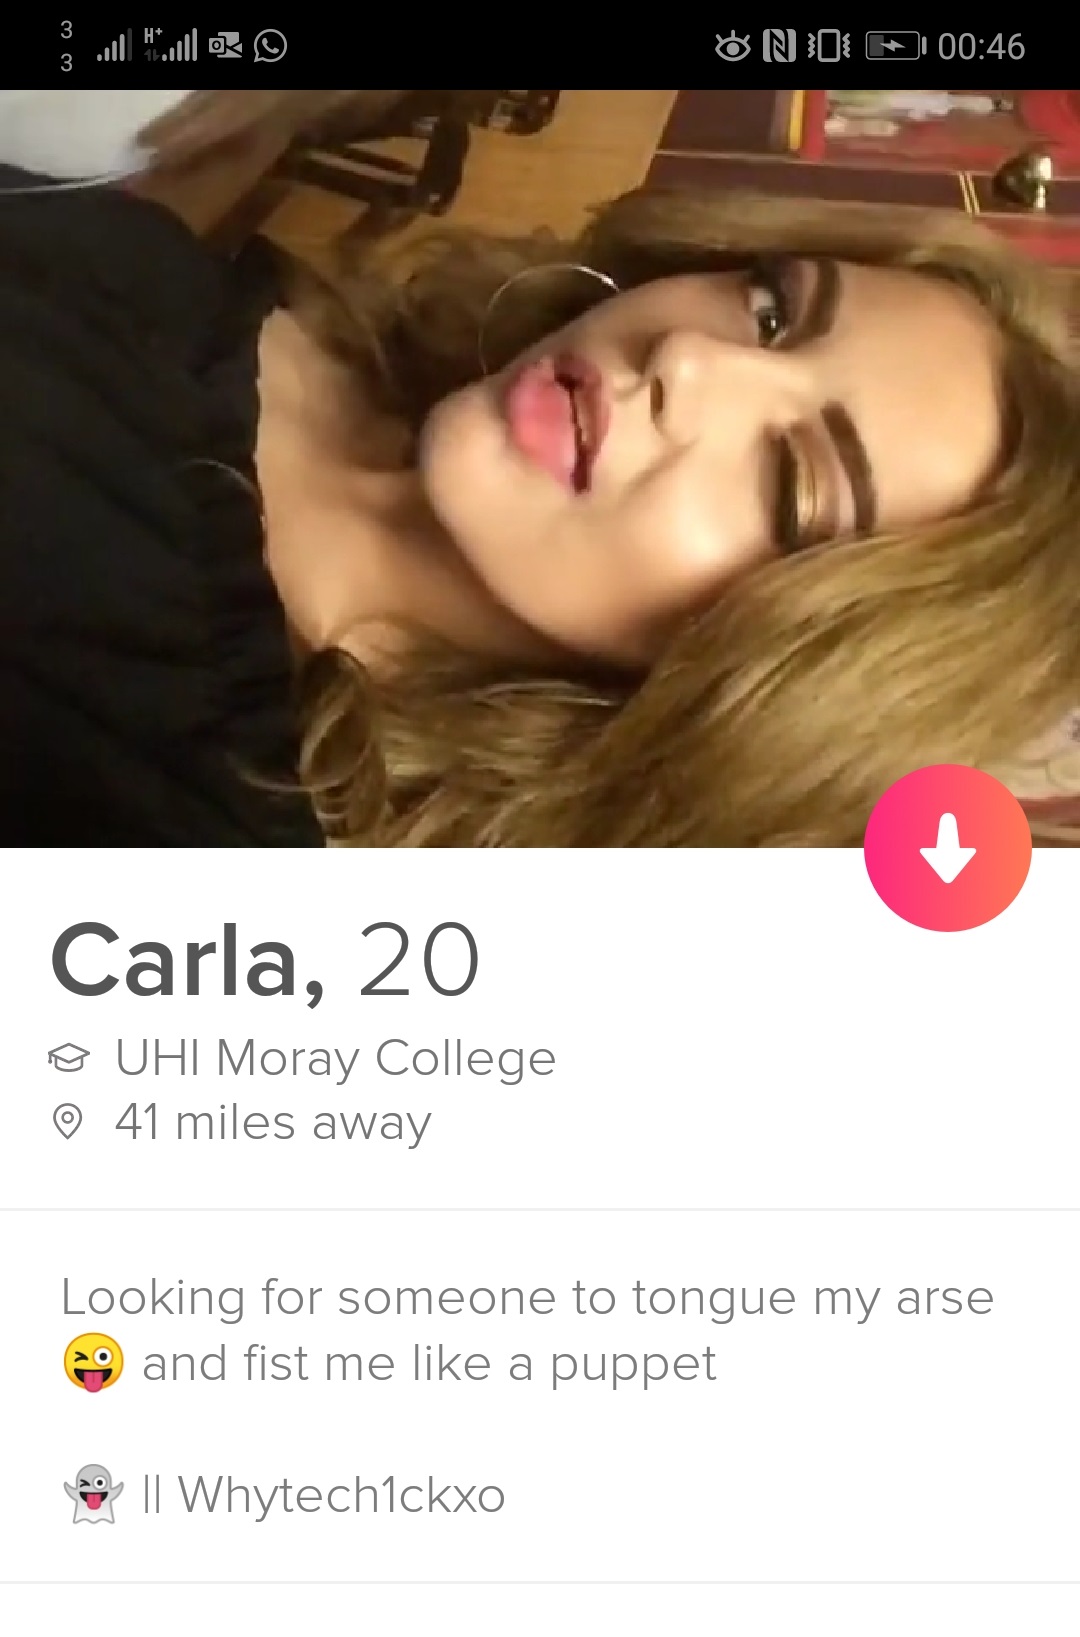 Carla, 20 Uhi Moray College 0 41 miles away Looking for someone to tongue my arse 29 and fist me like a puppet